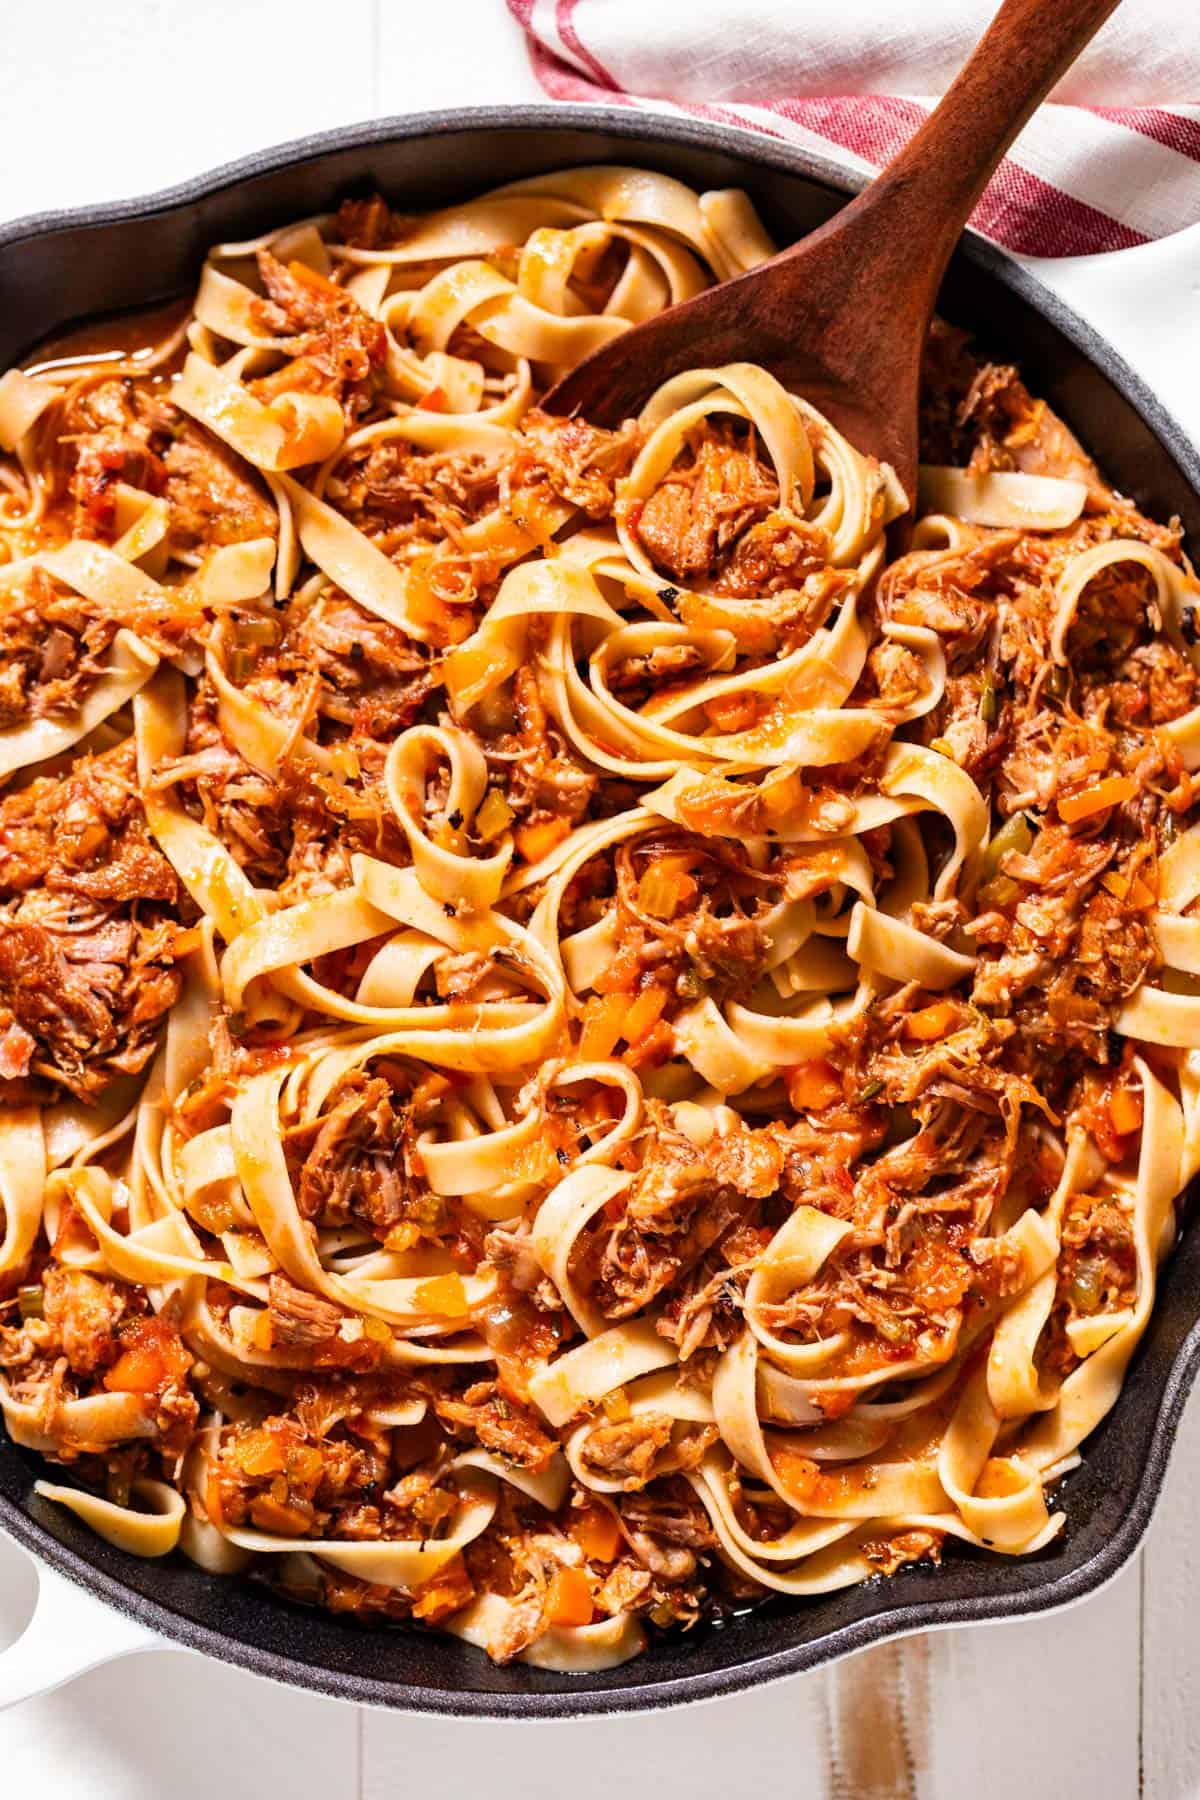 Pork ragu tossed together with tagliatelle pasta in a large white skillet.